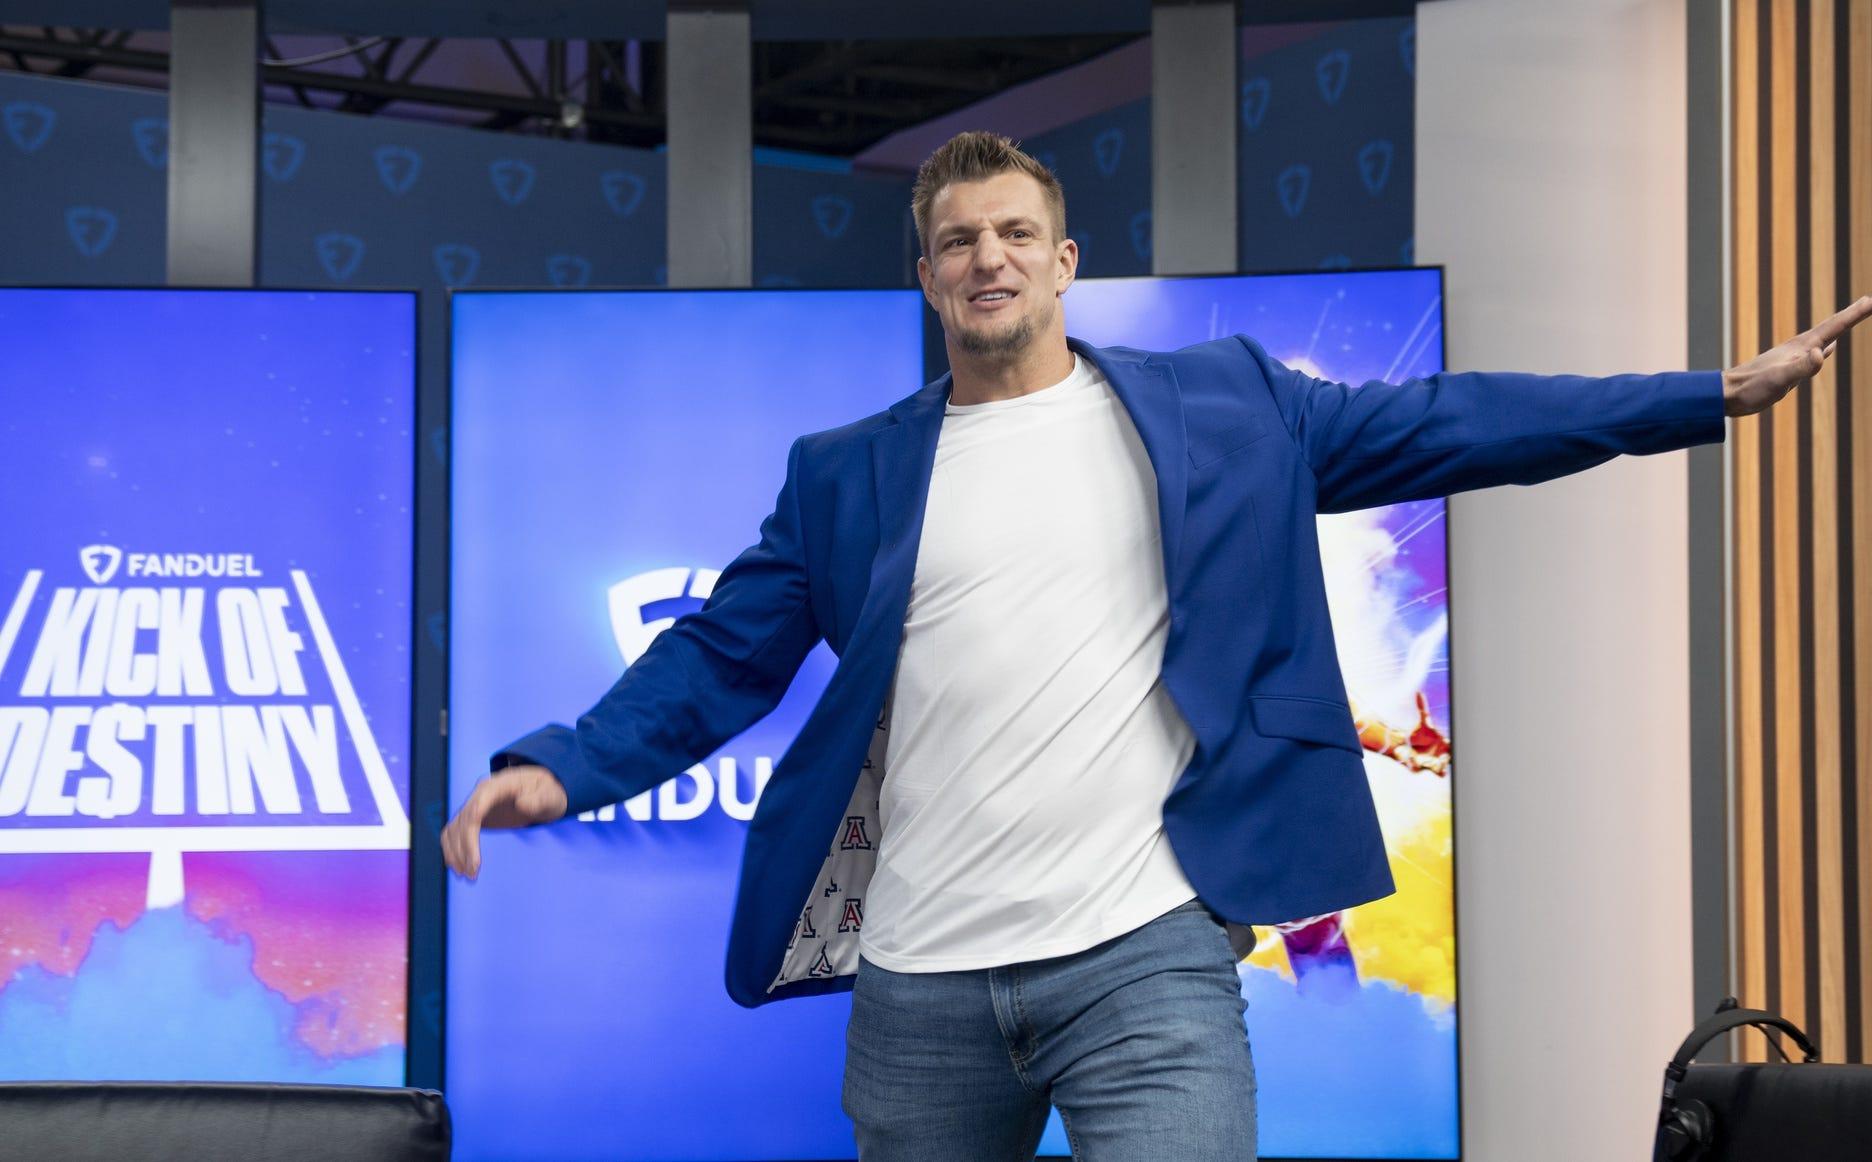 Feb 8, 2023; Scottsdale, AZ, USA; Former NFL tight end Rob Gronkowski talks about the Kick of Destiny during a press conference at the Phoenix Convention Center. Mandatory Credit: Cheryl Evans-USA TODAY Sports